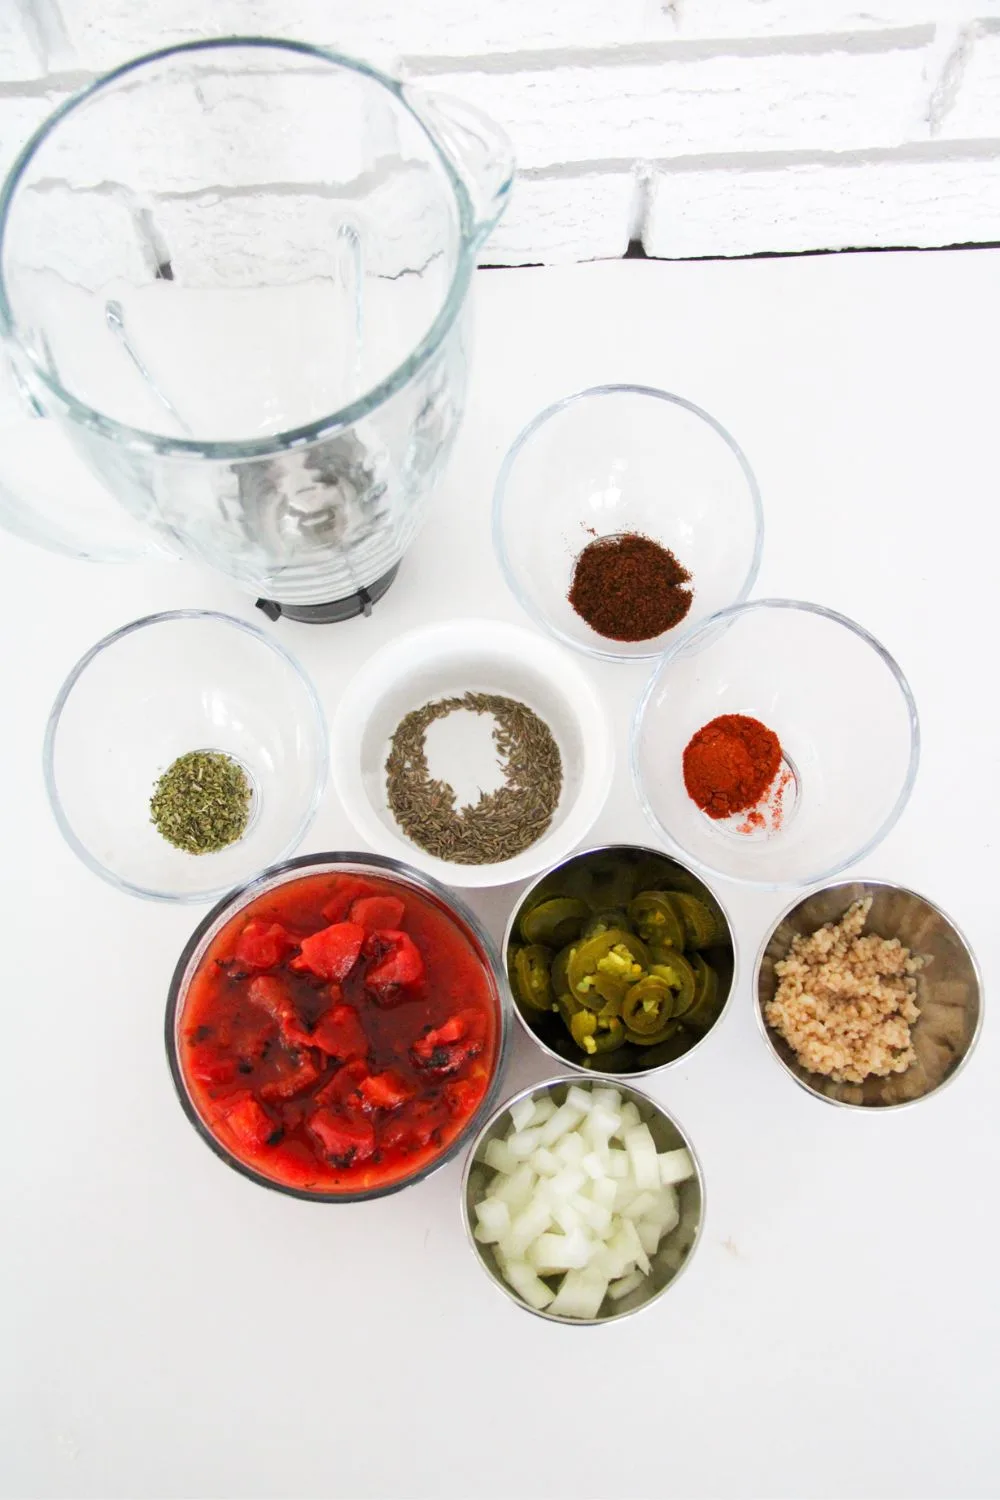 ingredients in individual bowls before being put into blender